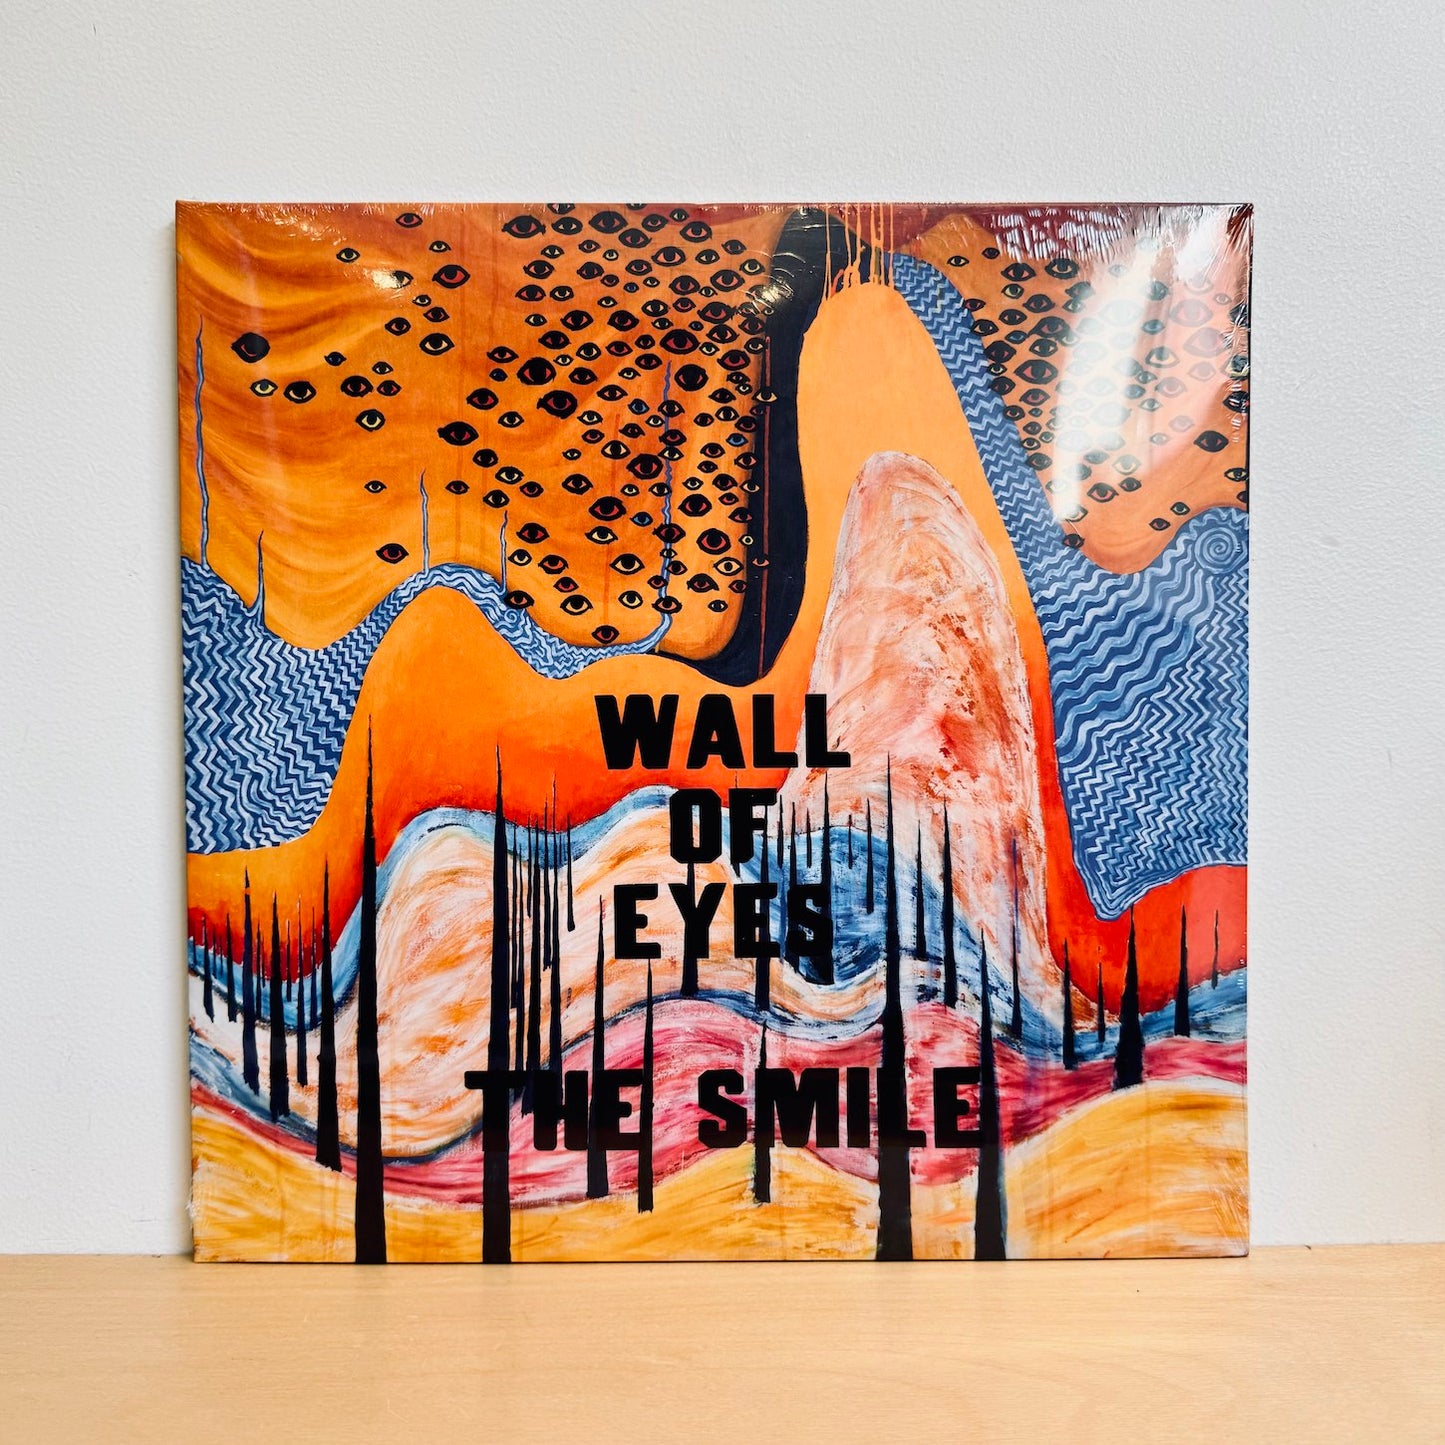 The Smile - Wall Of Eyes. LP